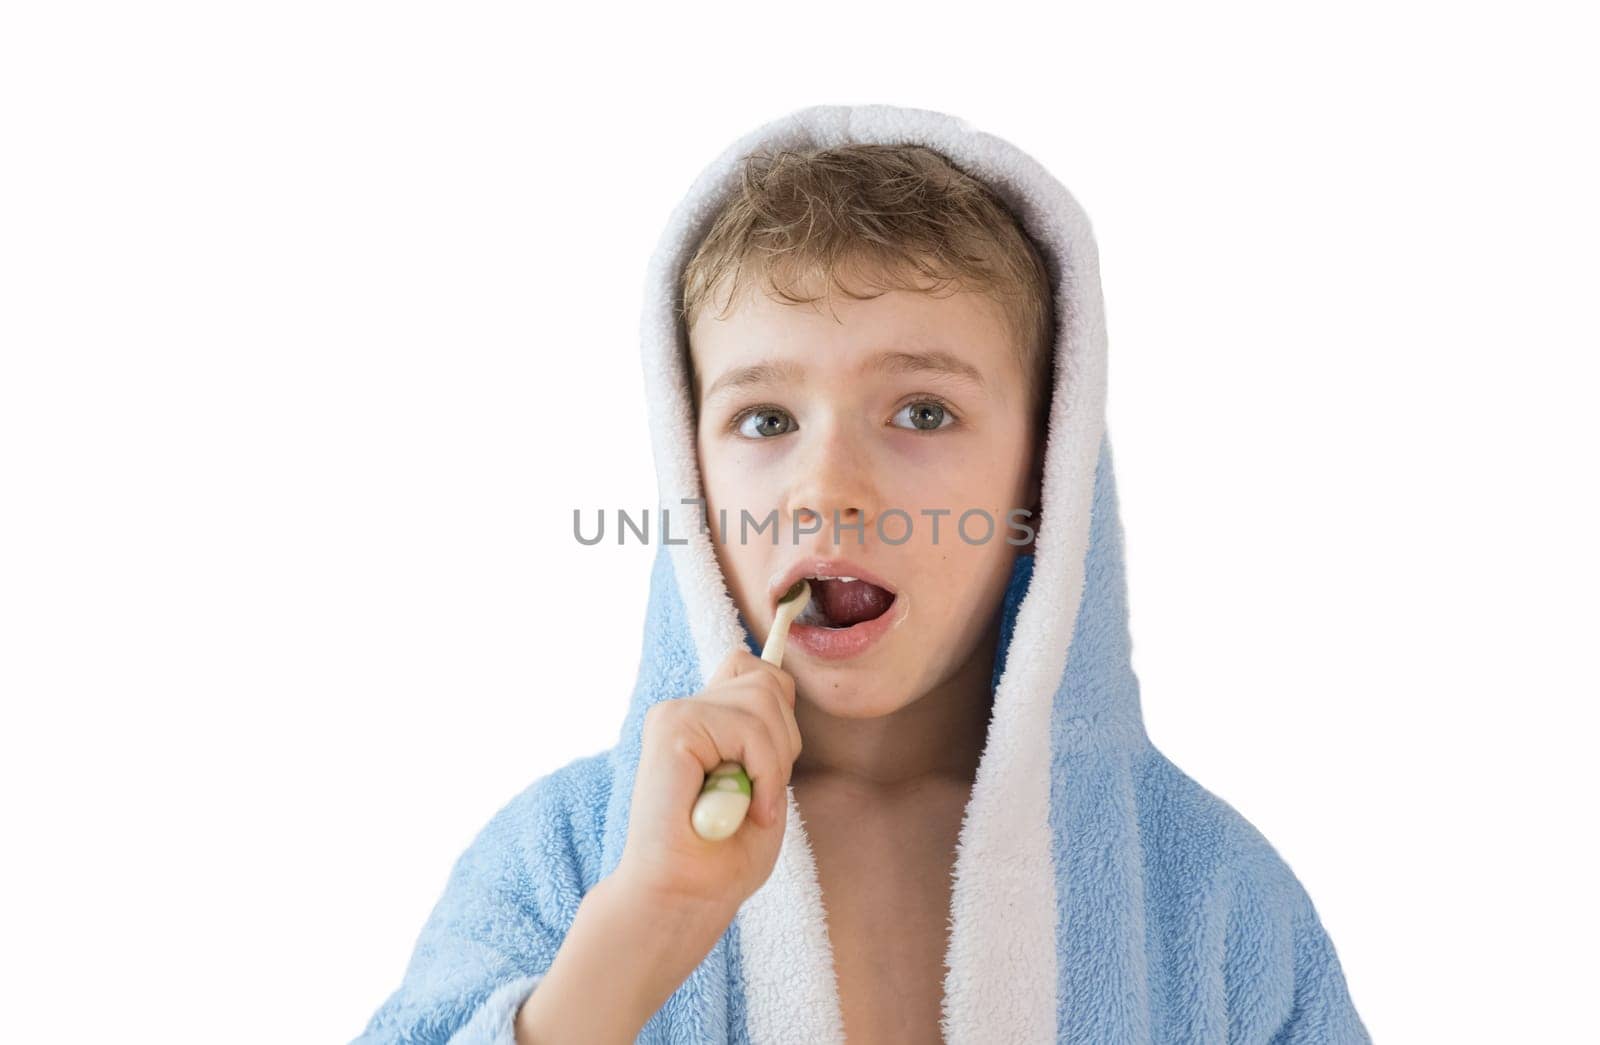 small child, boy in a blue terry robe with a toothbrush on white. A child brushes his teeth. Healthcare and dental care.